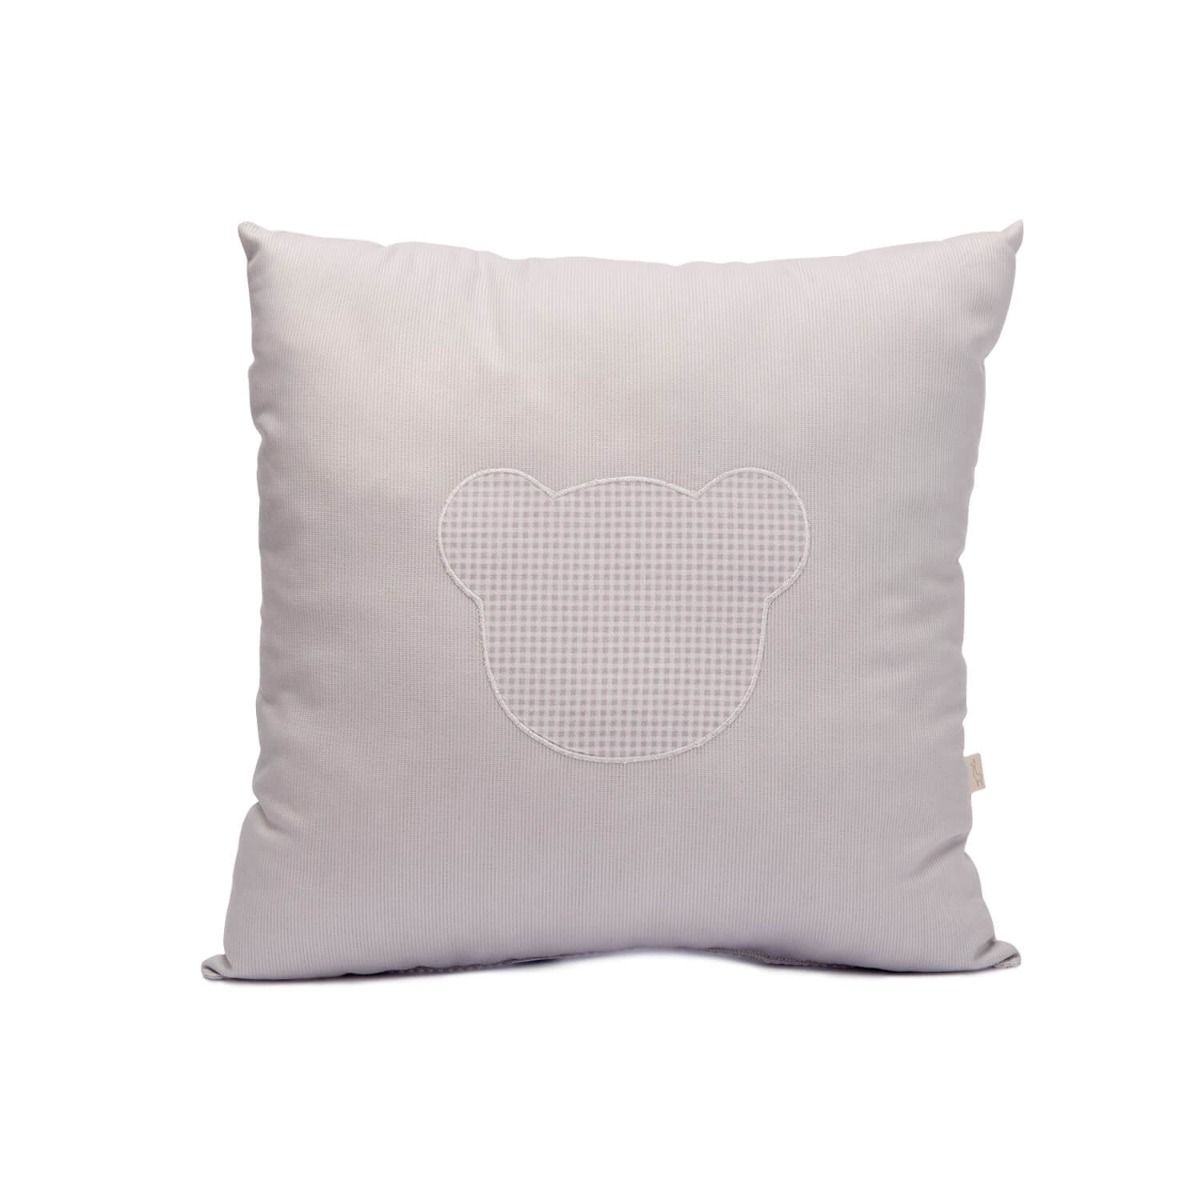 Square grey pillow with teddy bear.